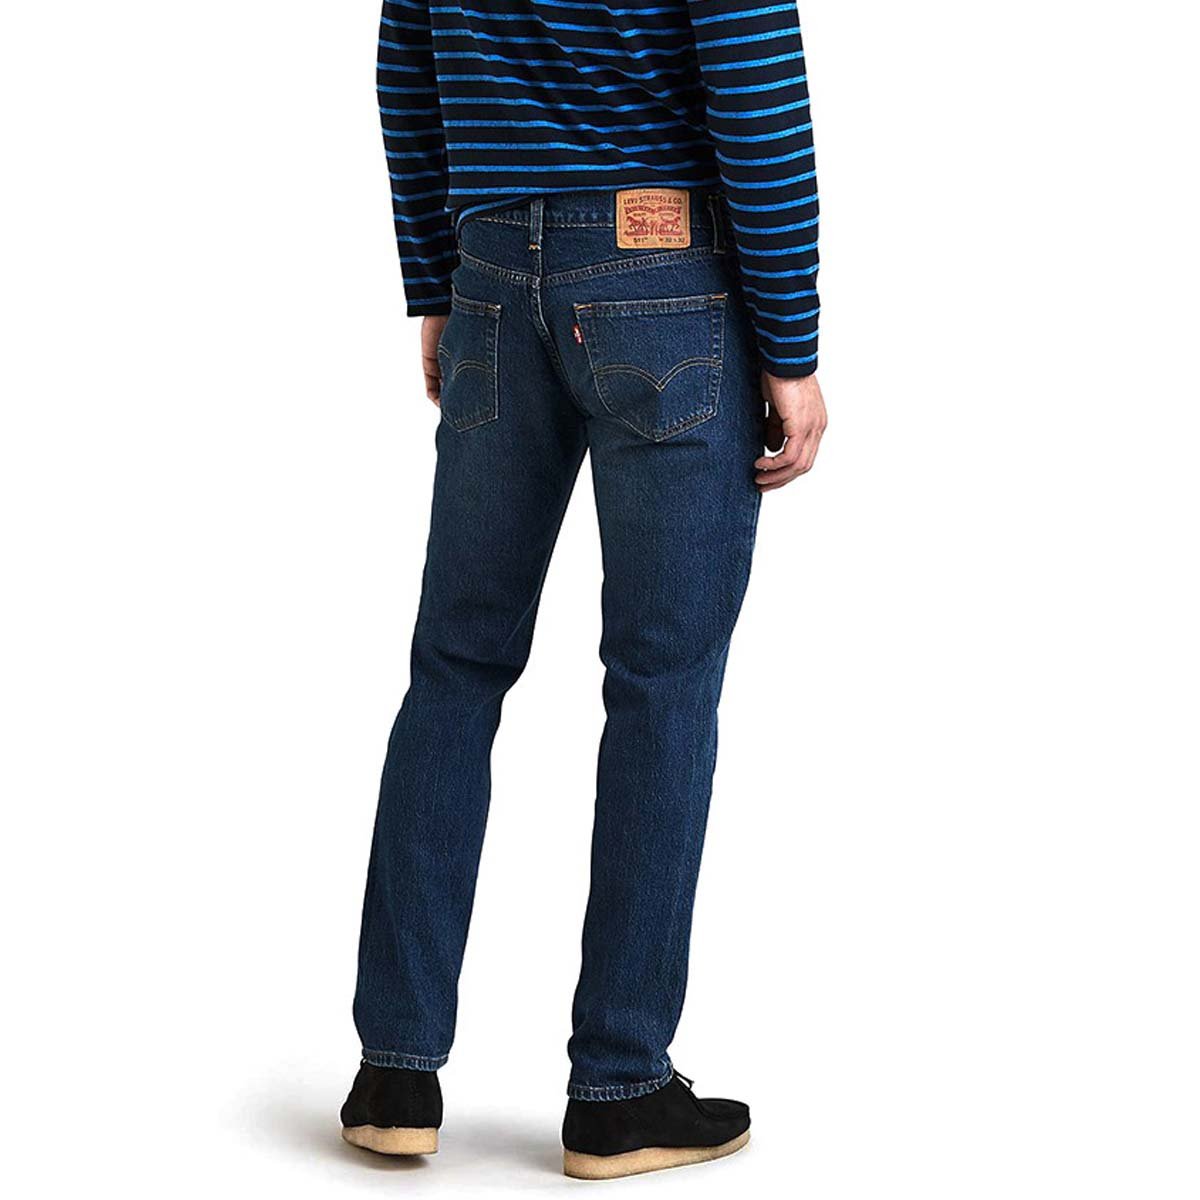 Jeans 511&trade; Slim Fit Color Azul.